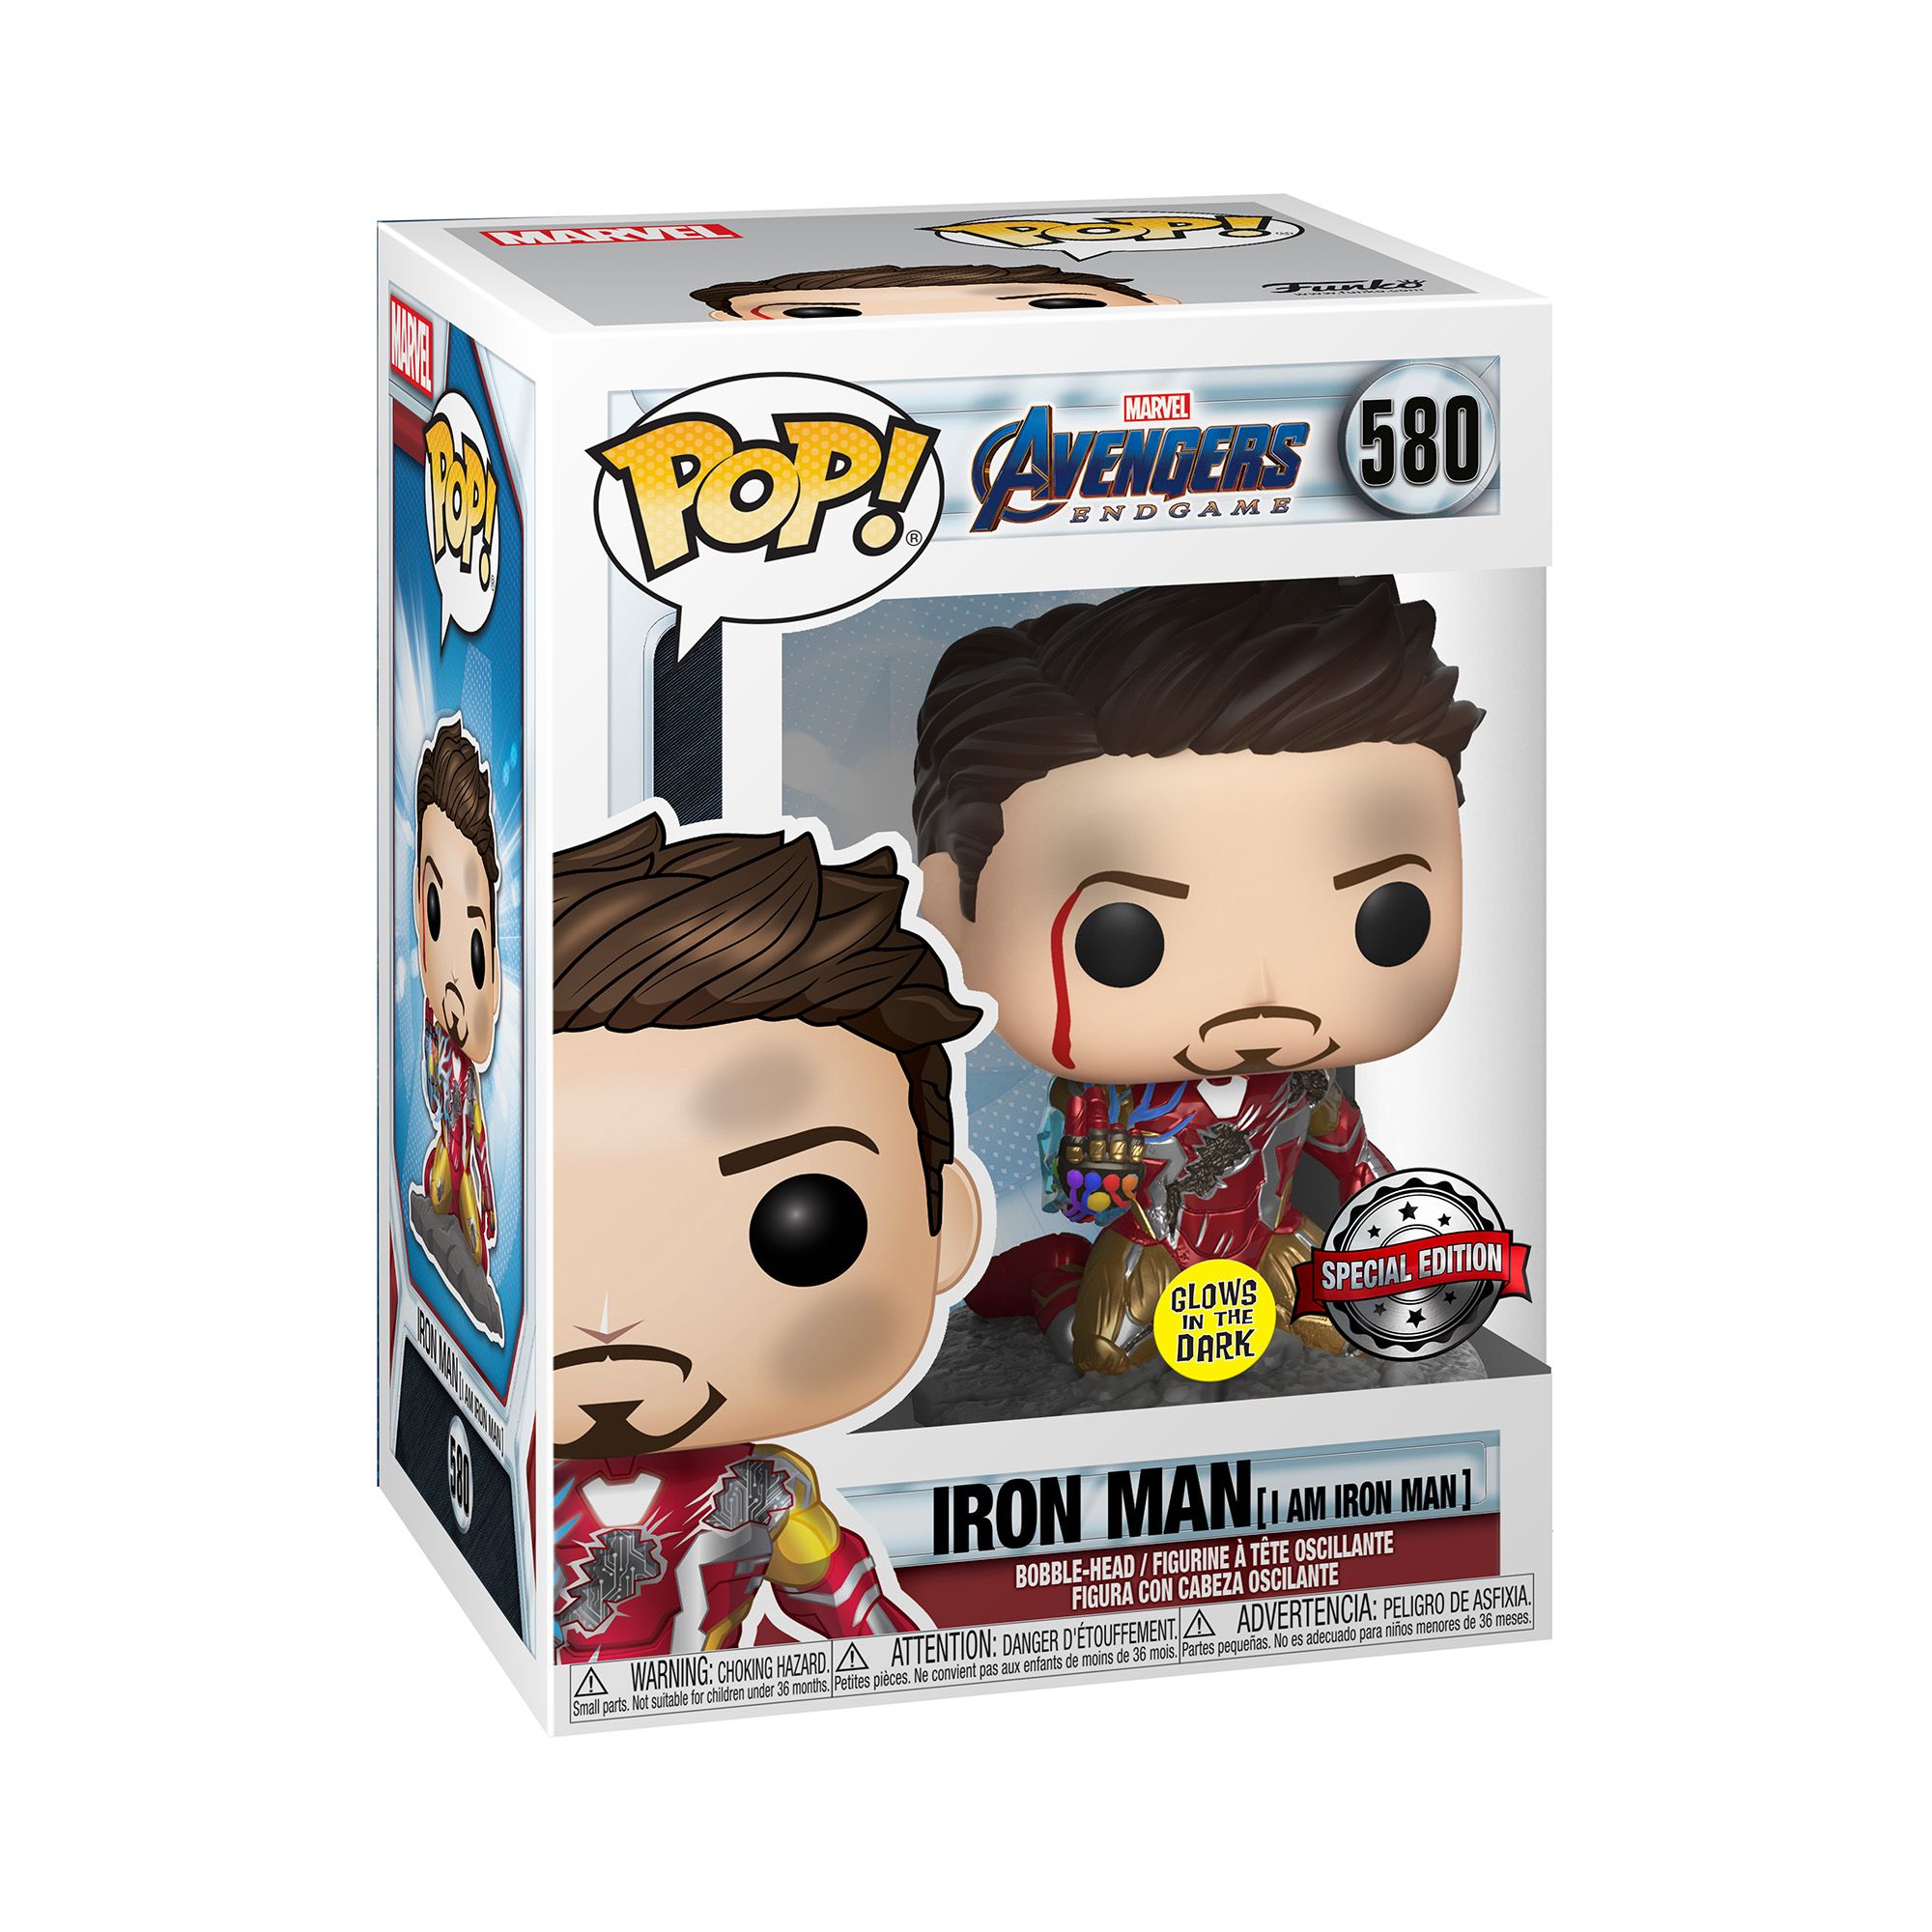 In-box look at the exclusive glow-in-the-dark Pop! Iron Man (I Am Iron Man).